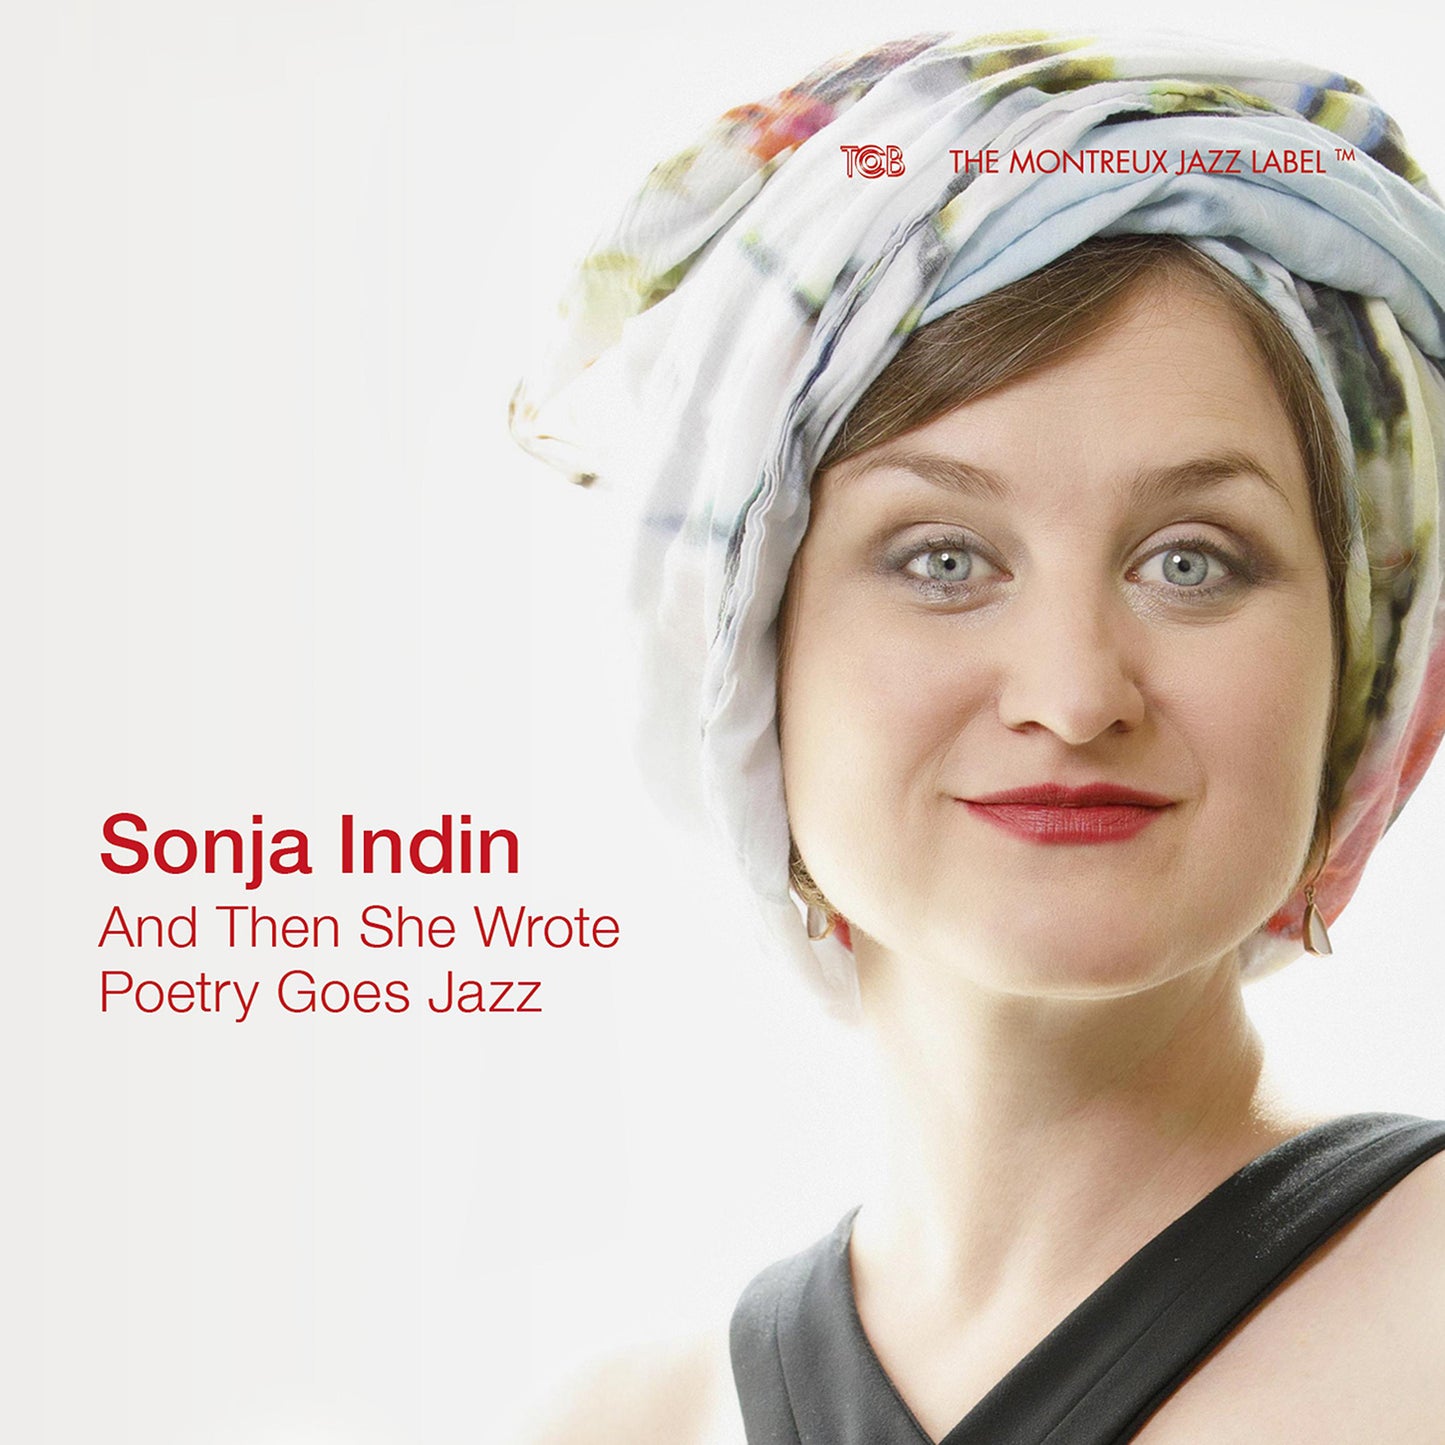 And Then She Wrote / Sonja Indin